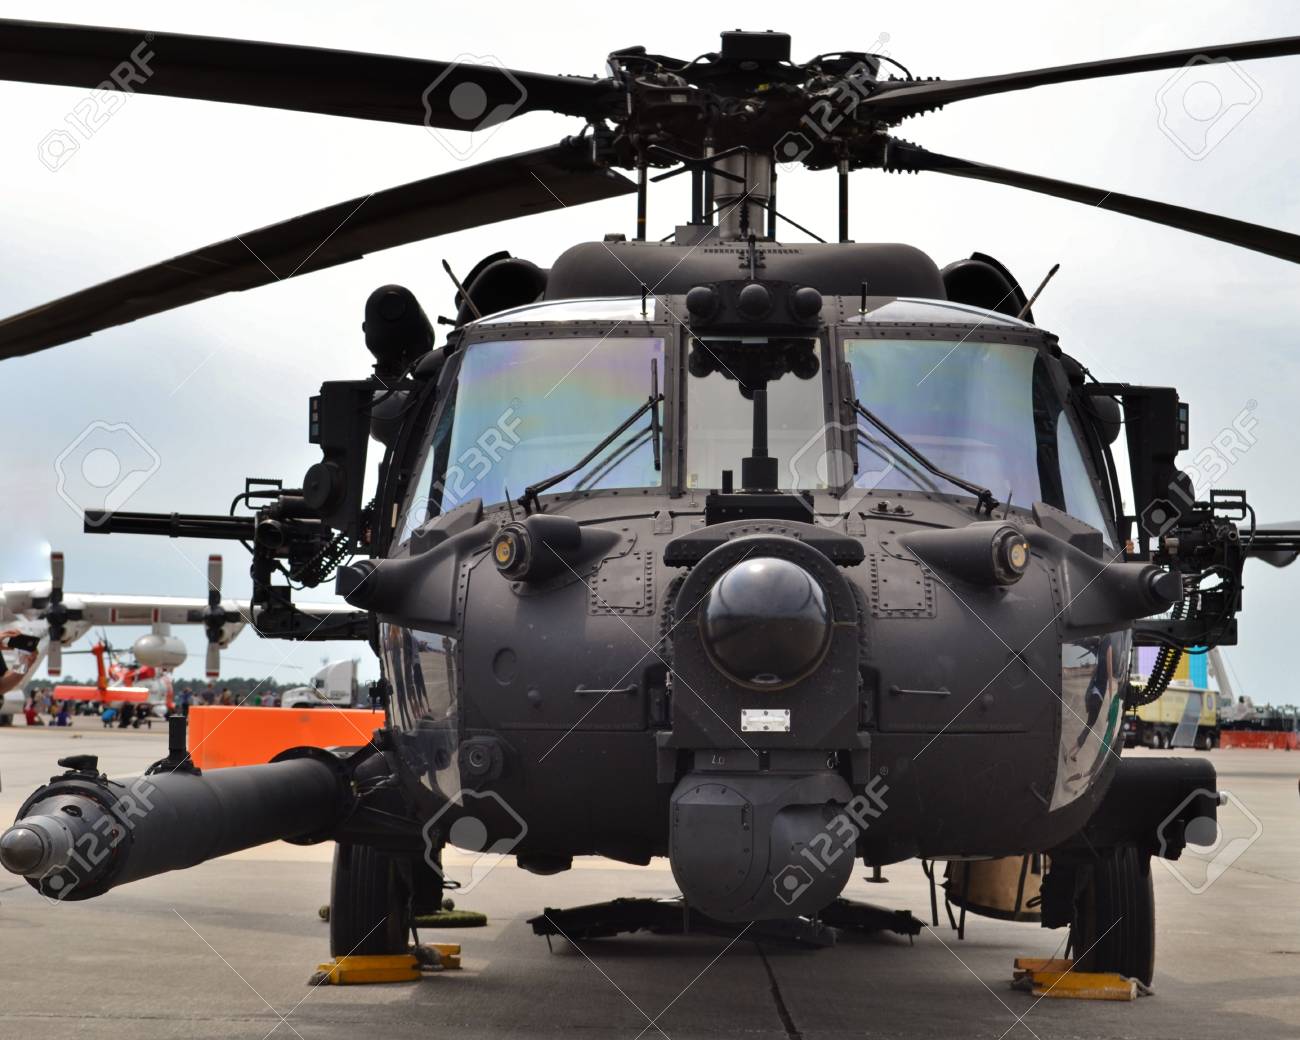 90482786-special-forces-mh-60-blackhawk-helicopter-304586b2d38e64059f75070b22db2856.jpg